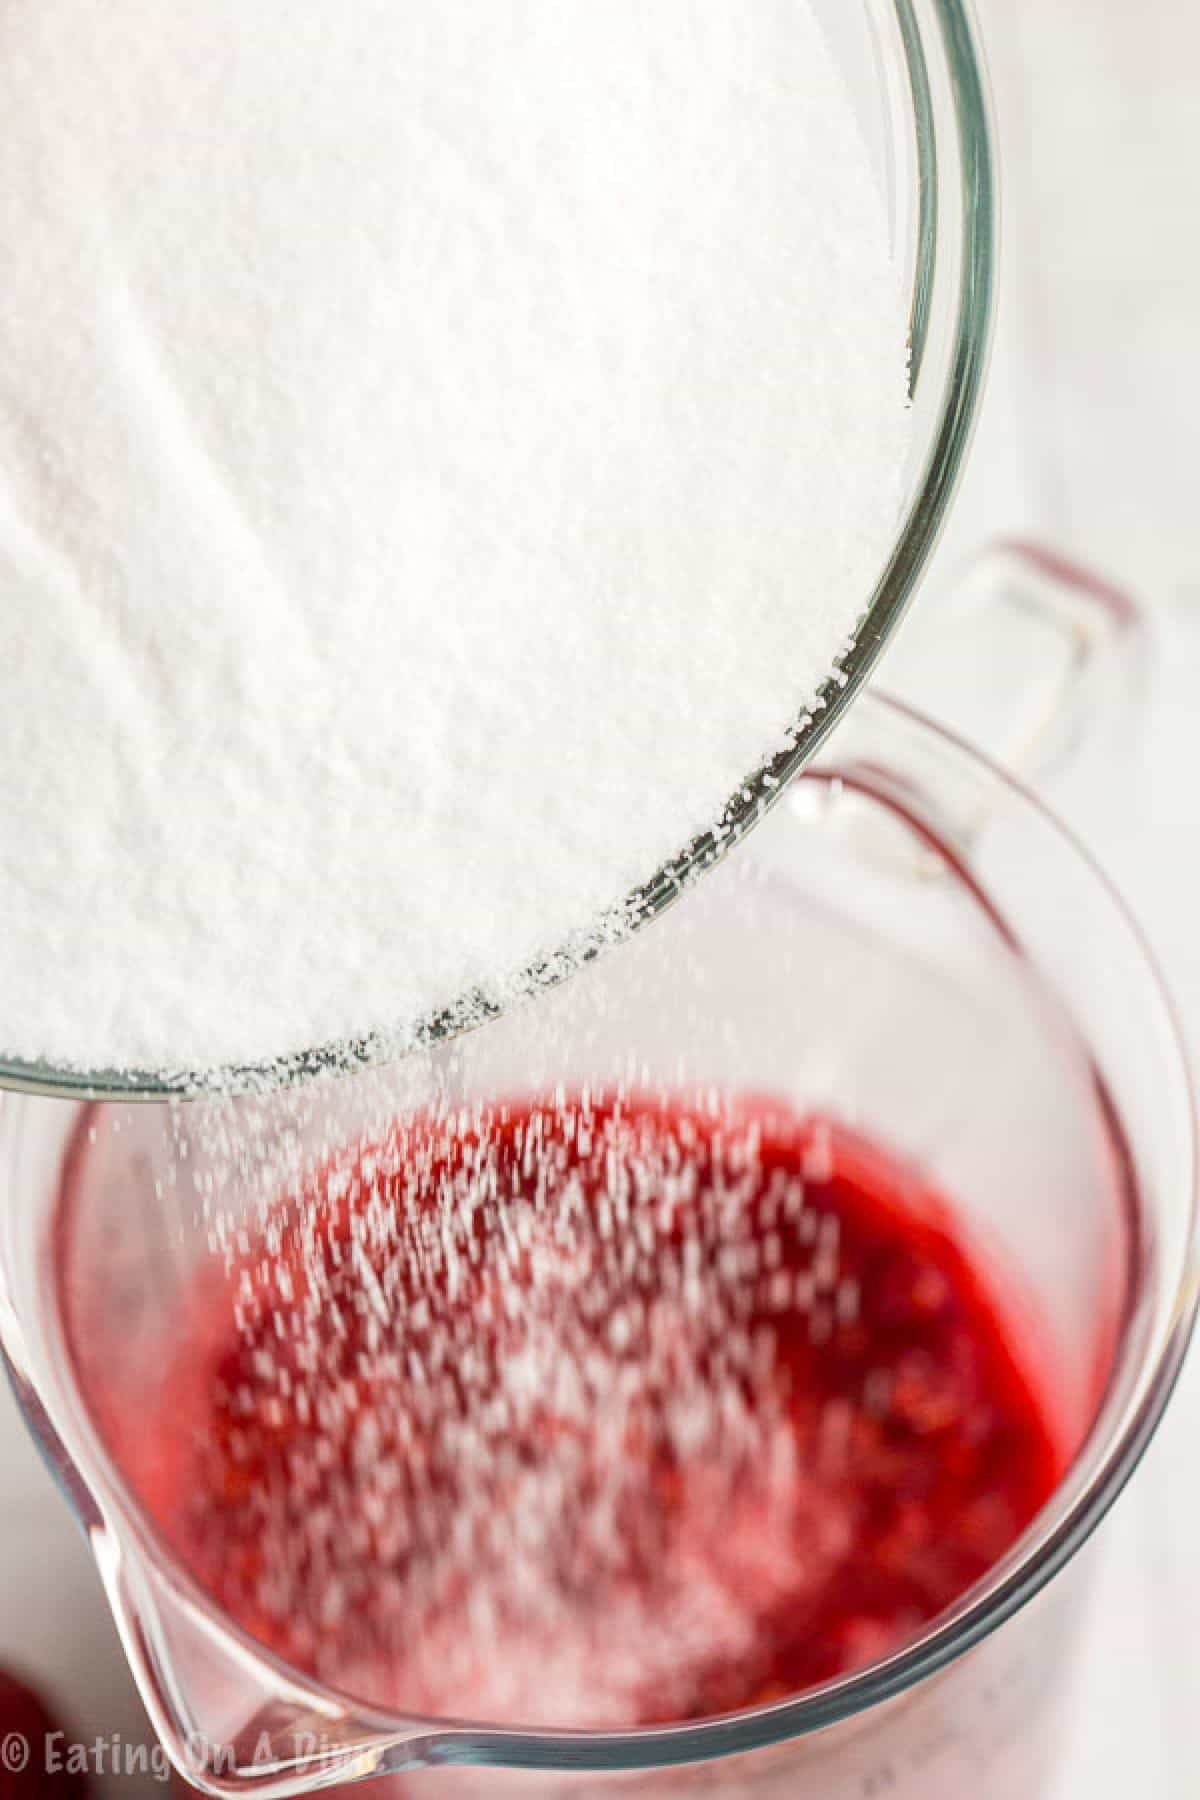 Pouring in the sugar into the mashed raspberries